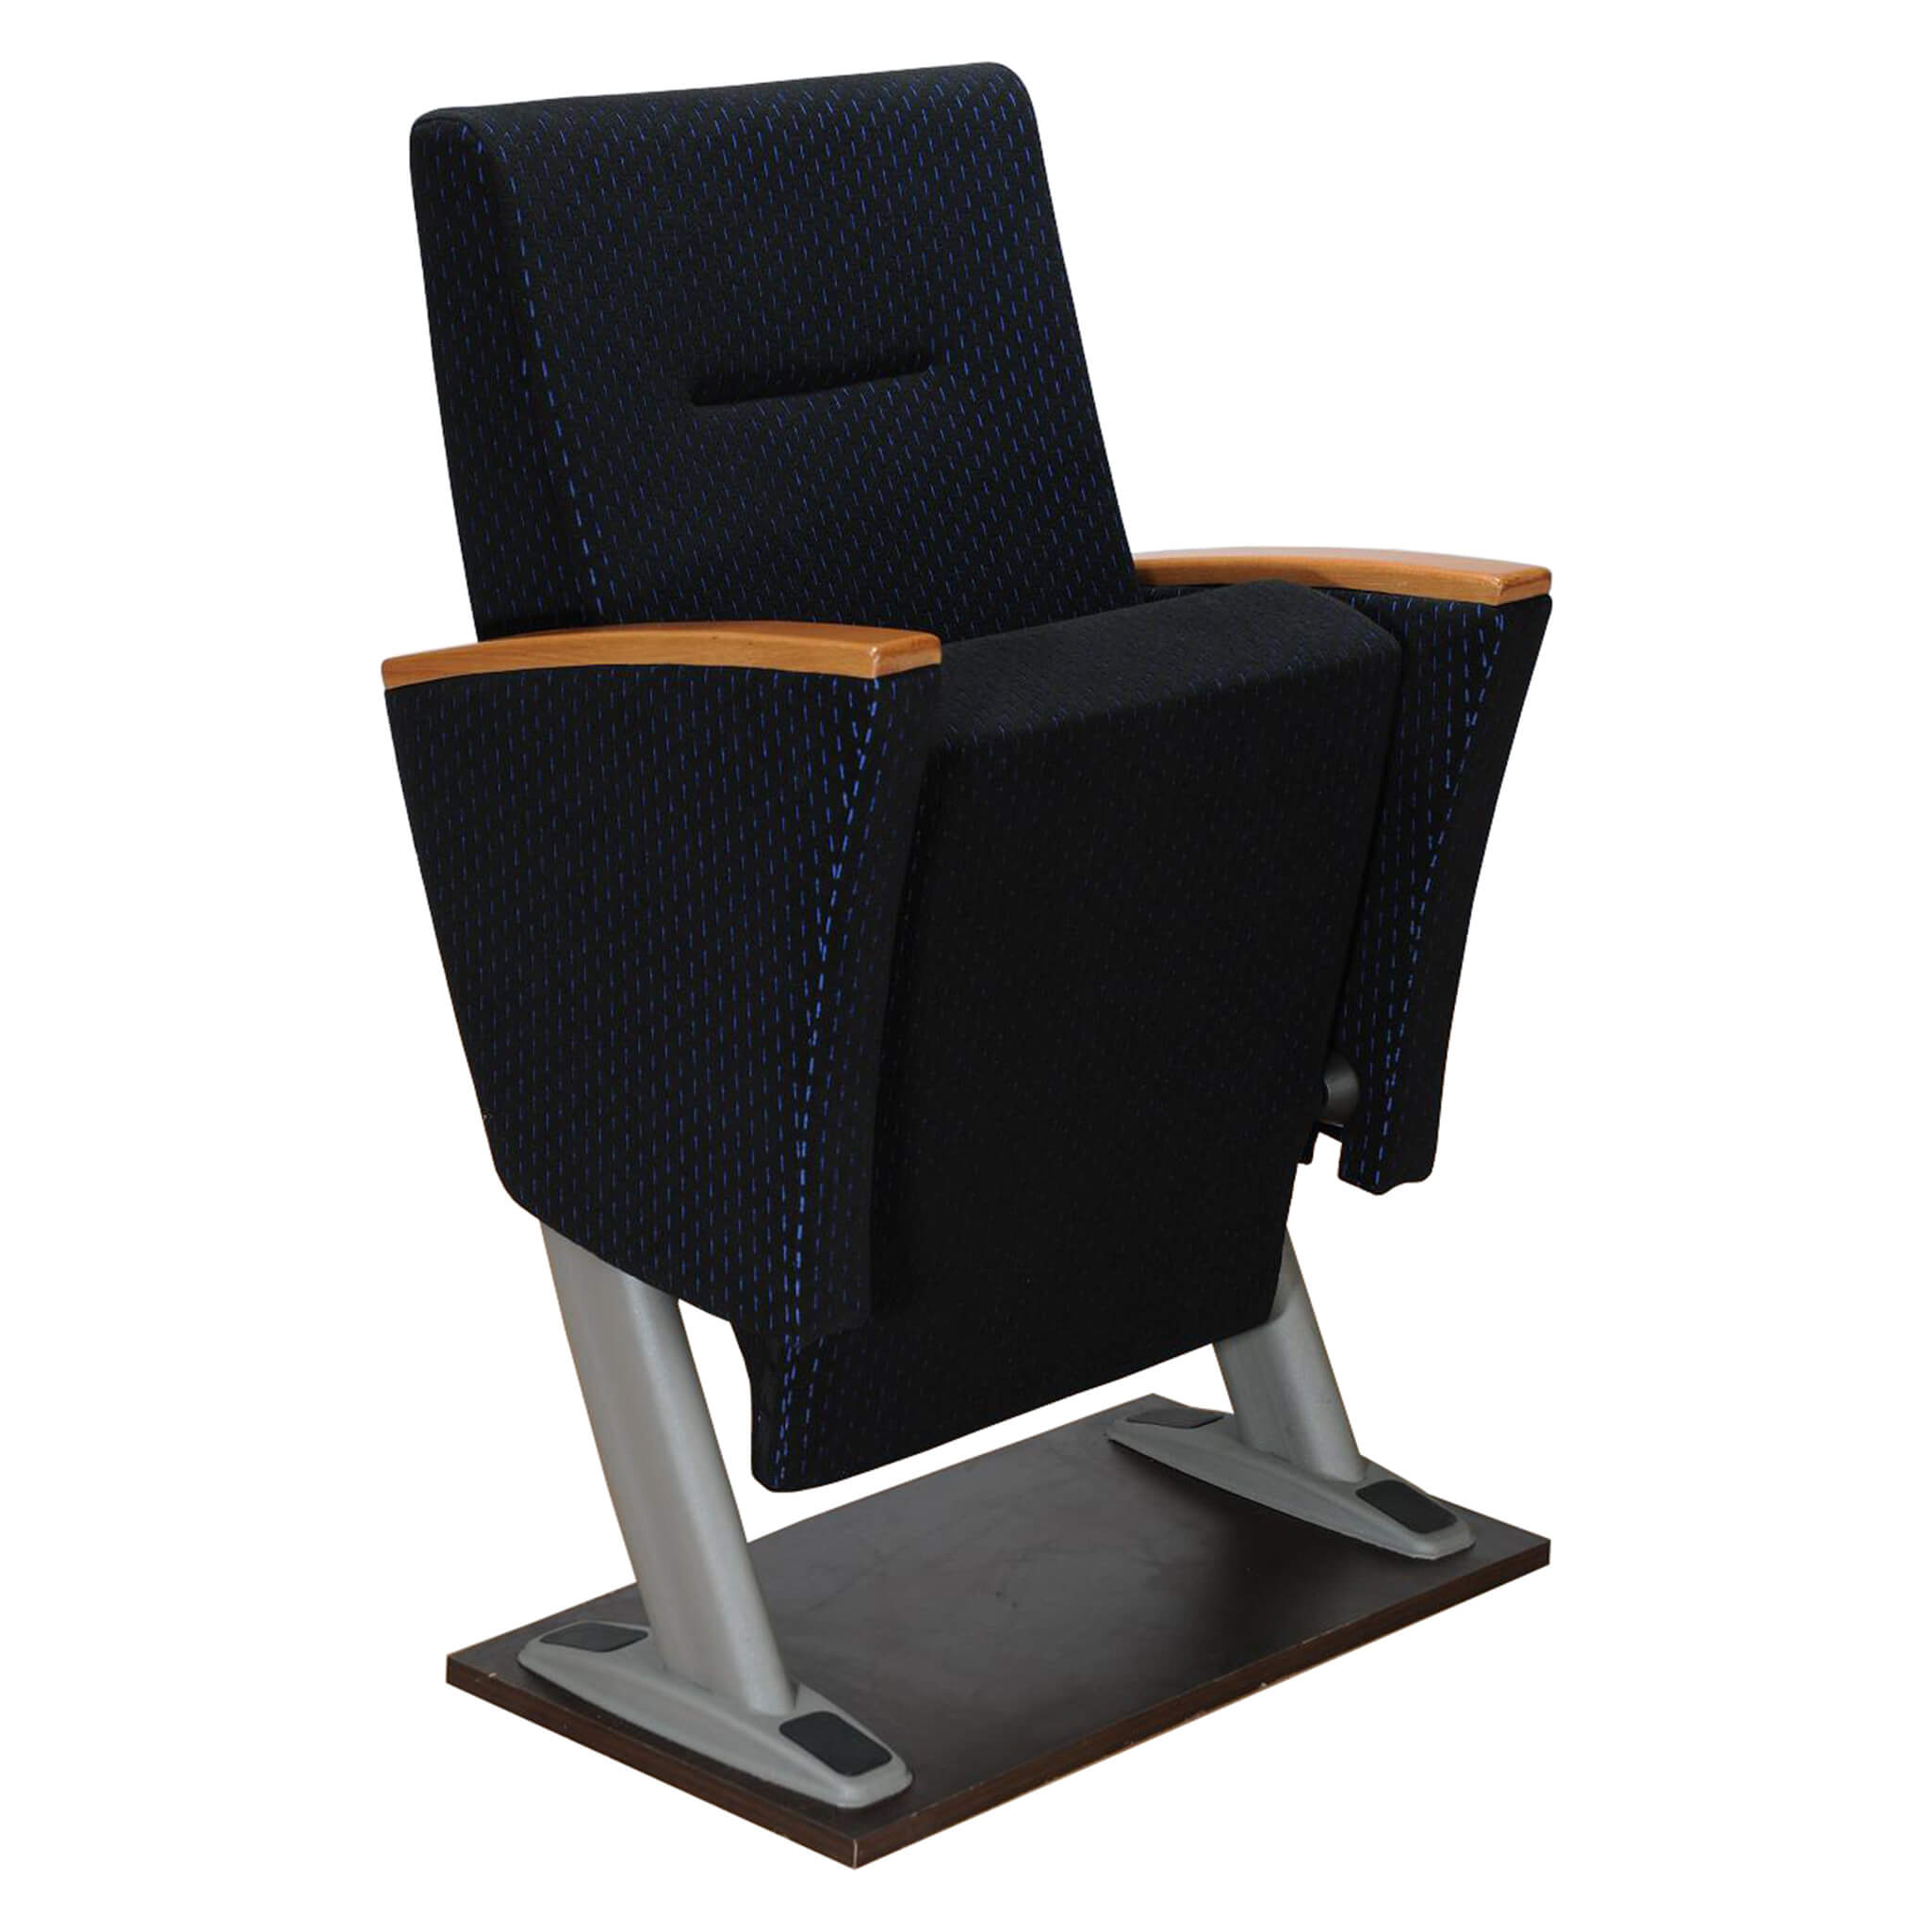 Akon Series - A40 Model - Auditorium, Theater Chair - Dimensions, Price